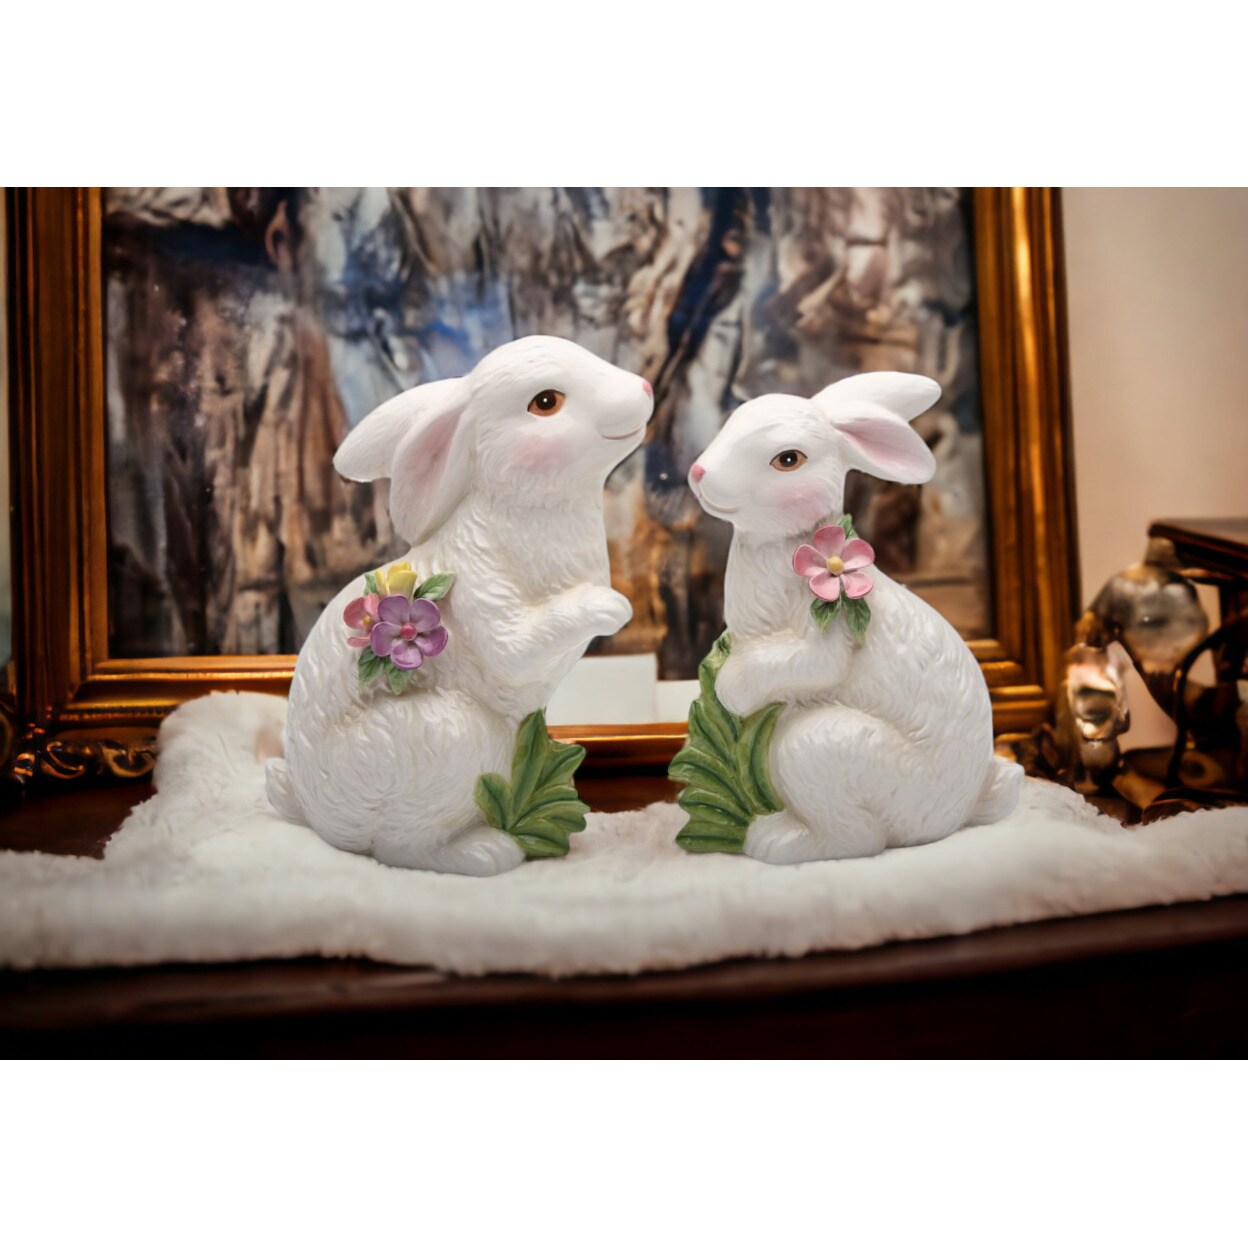 kevinsgiftshoppe Springtime Bunnies: Cute Easter Rabbits with Flowers Figurines Set of 2